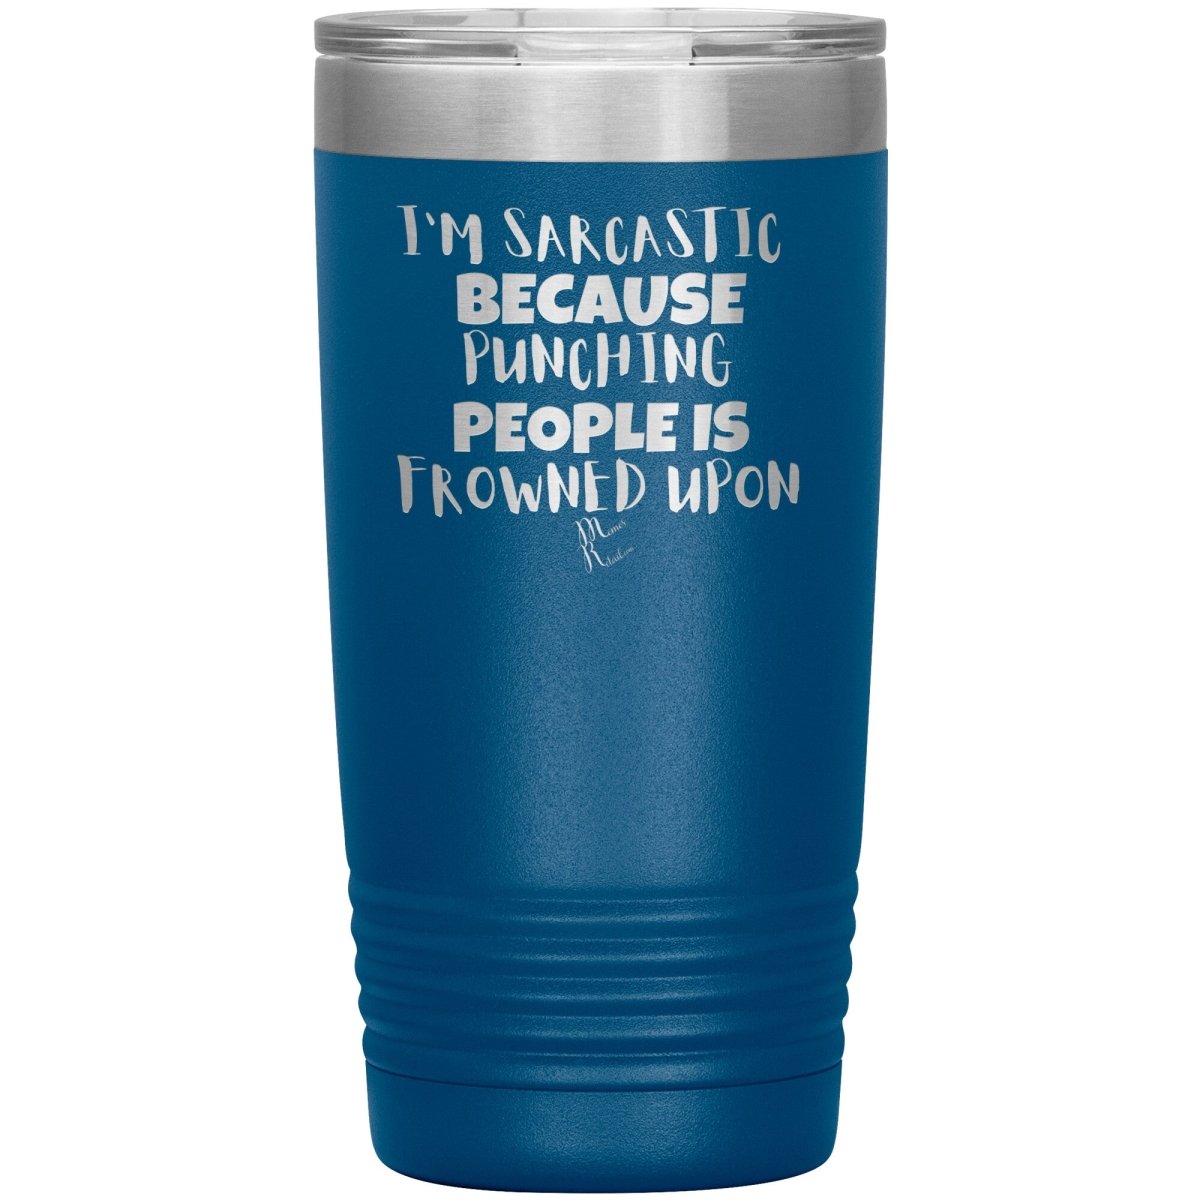 I'm Sarcastic Because Punching People is Frowned Upon Tumblers, 20oz Insulated Tumbler / Blue - MemesRetail.com